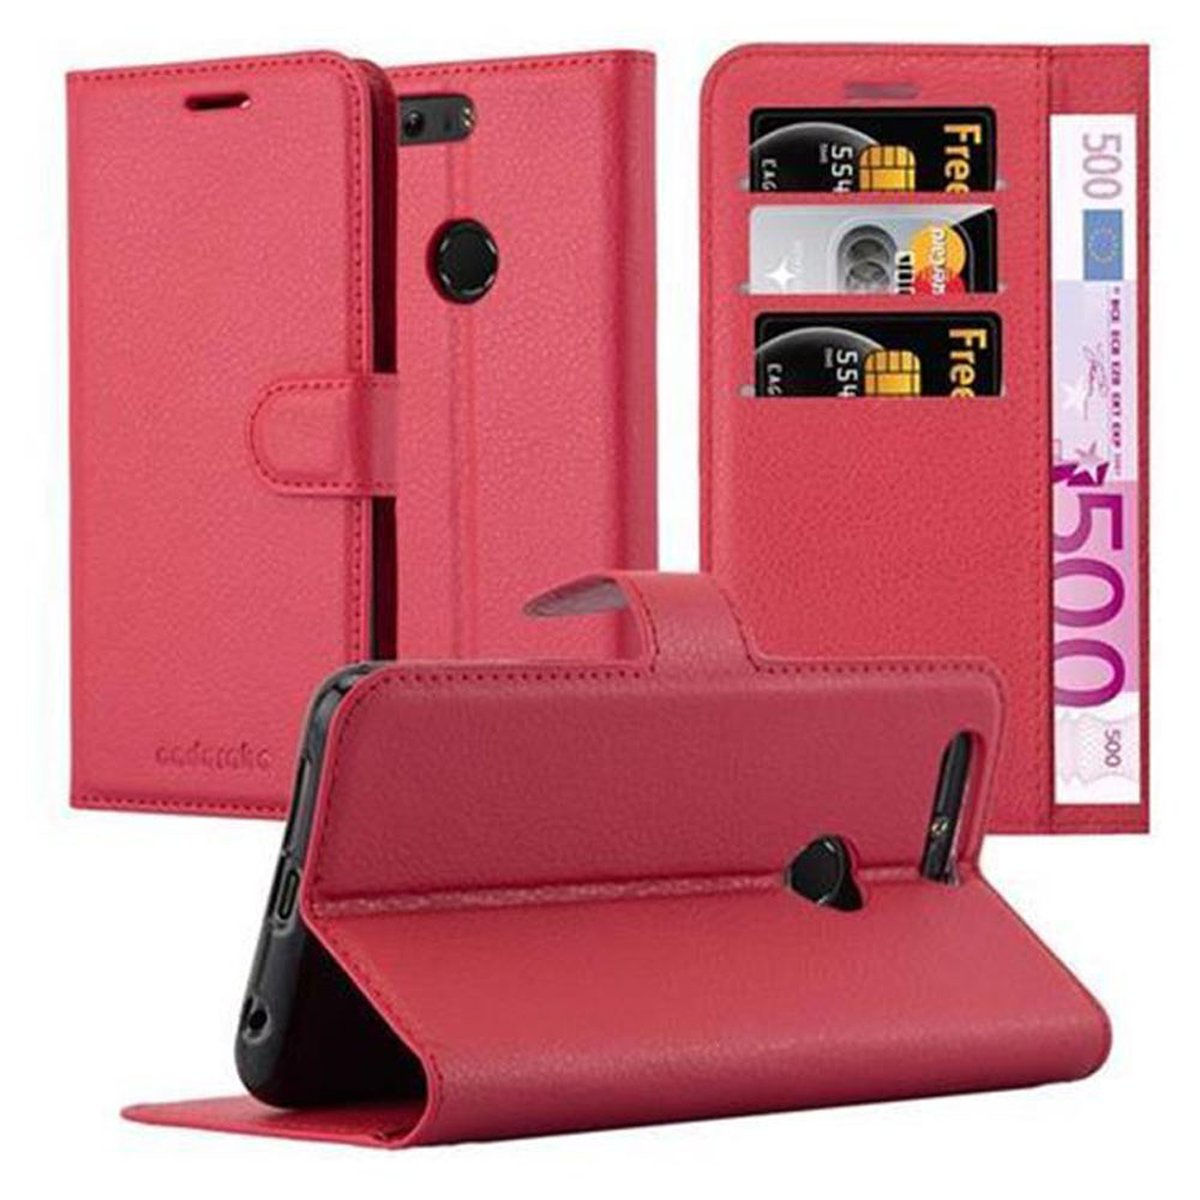 Bookcover, PREMIUM, 8 8 KARMIN Honor, ROT CADORABO Standfunktion, Hülle / Book